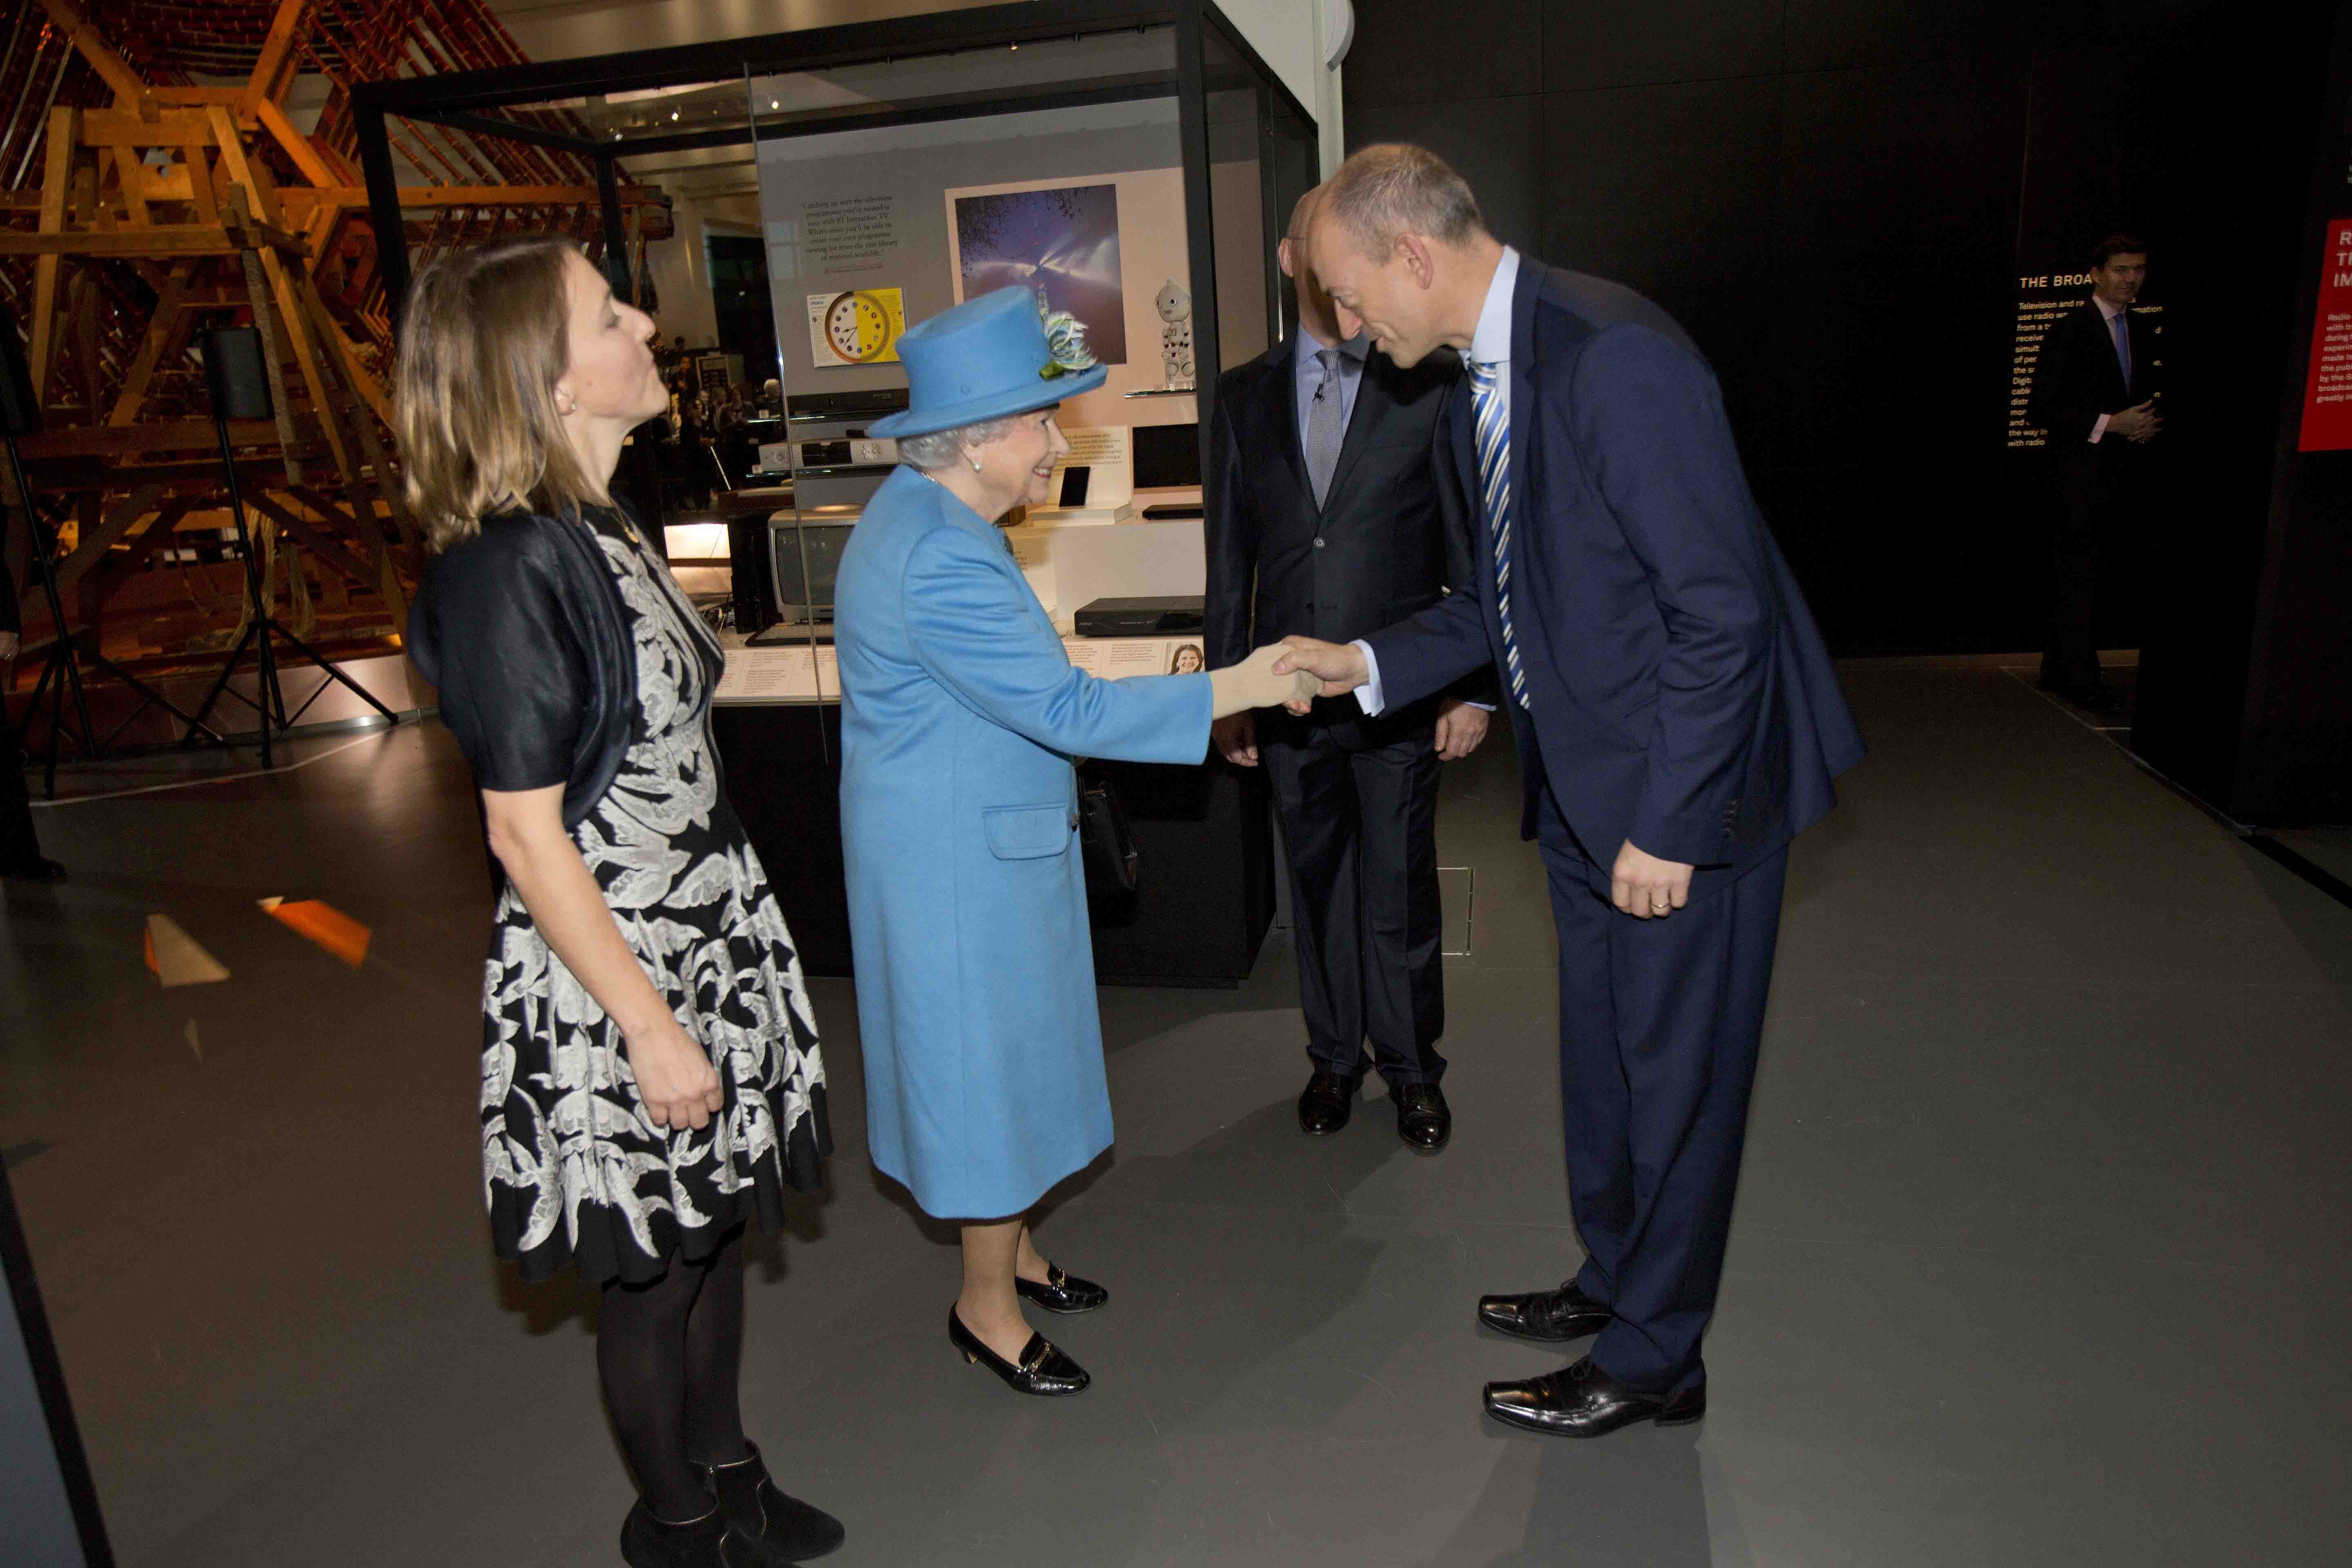 The Queen meets Simon Segars, CEO of ARM. Image credit: Tim Anderson